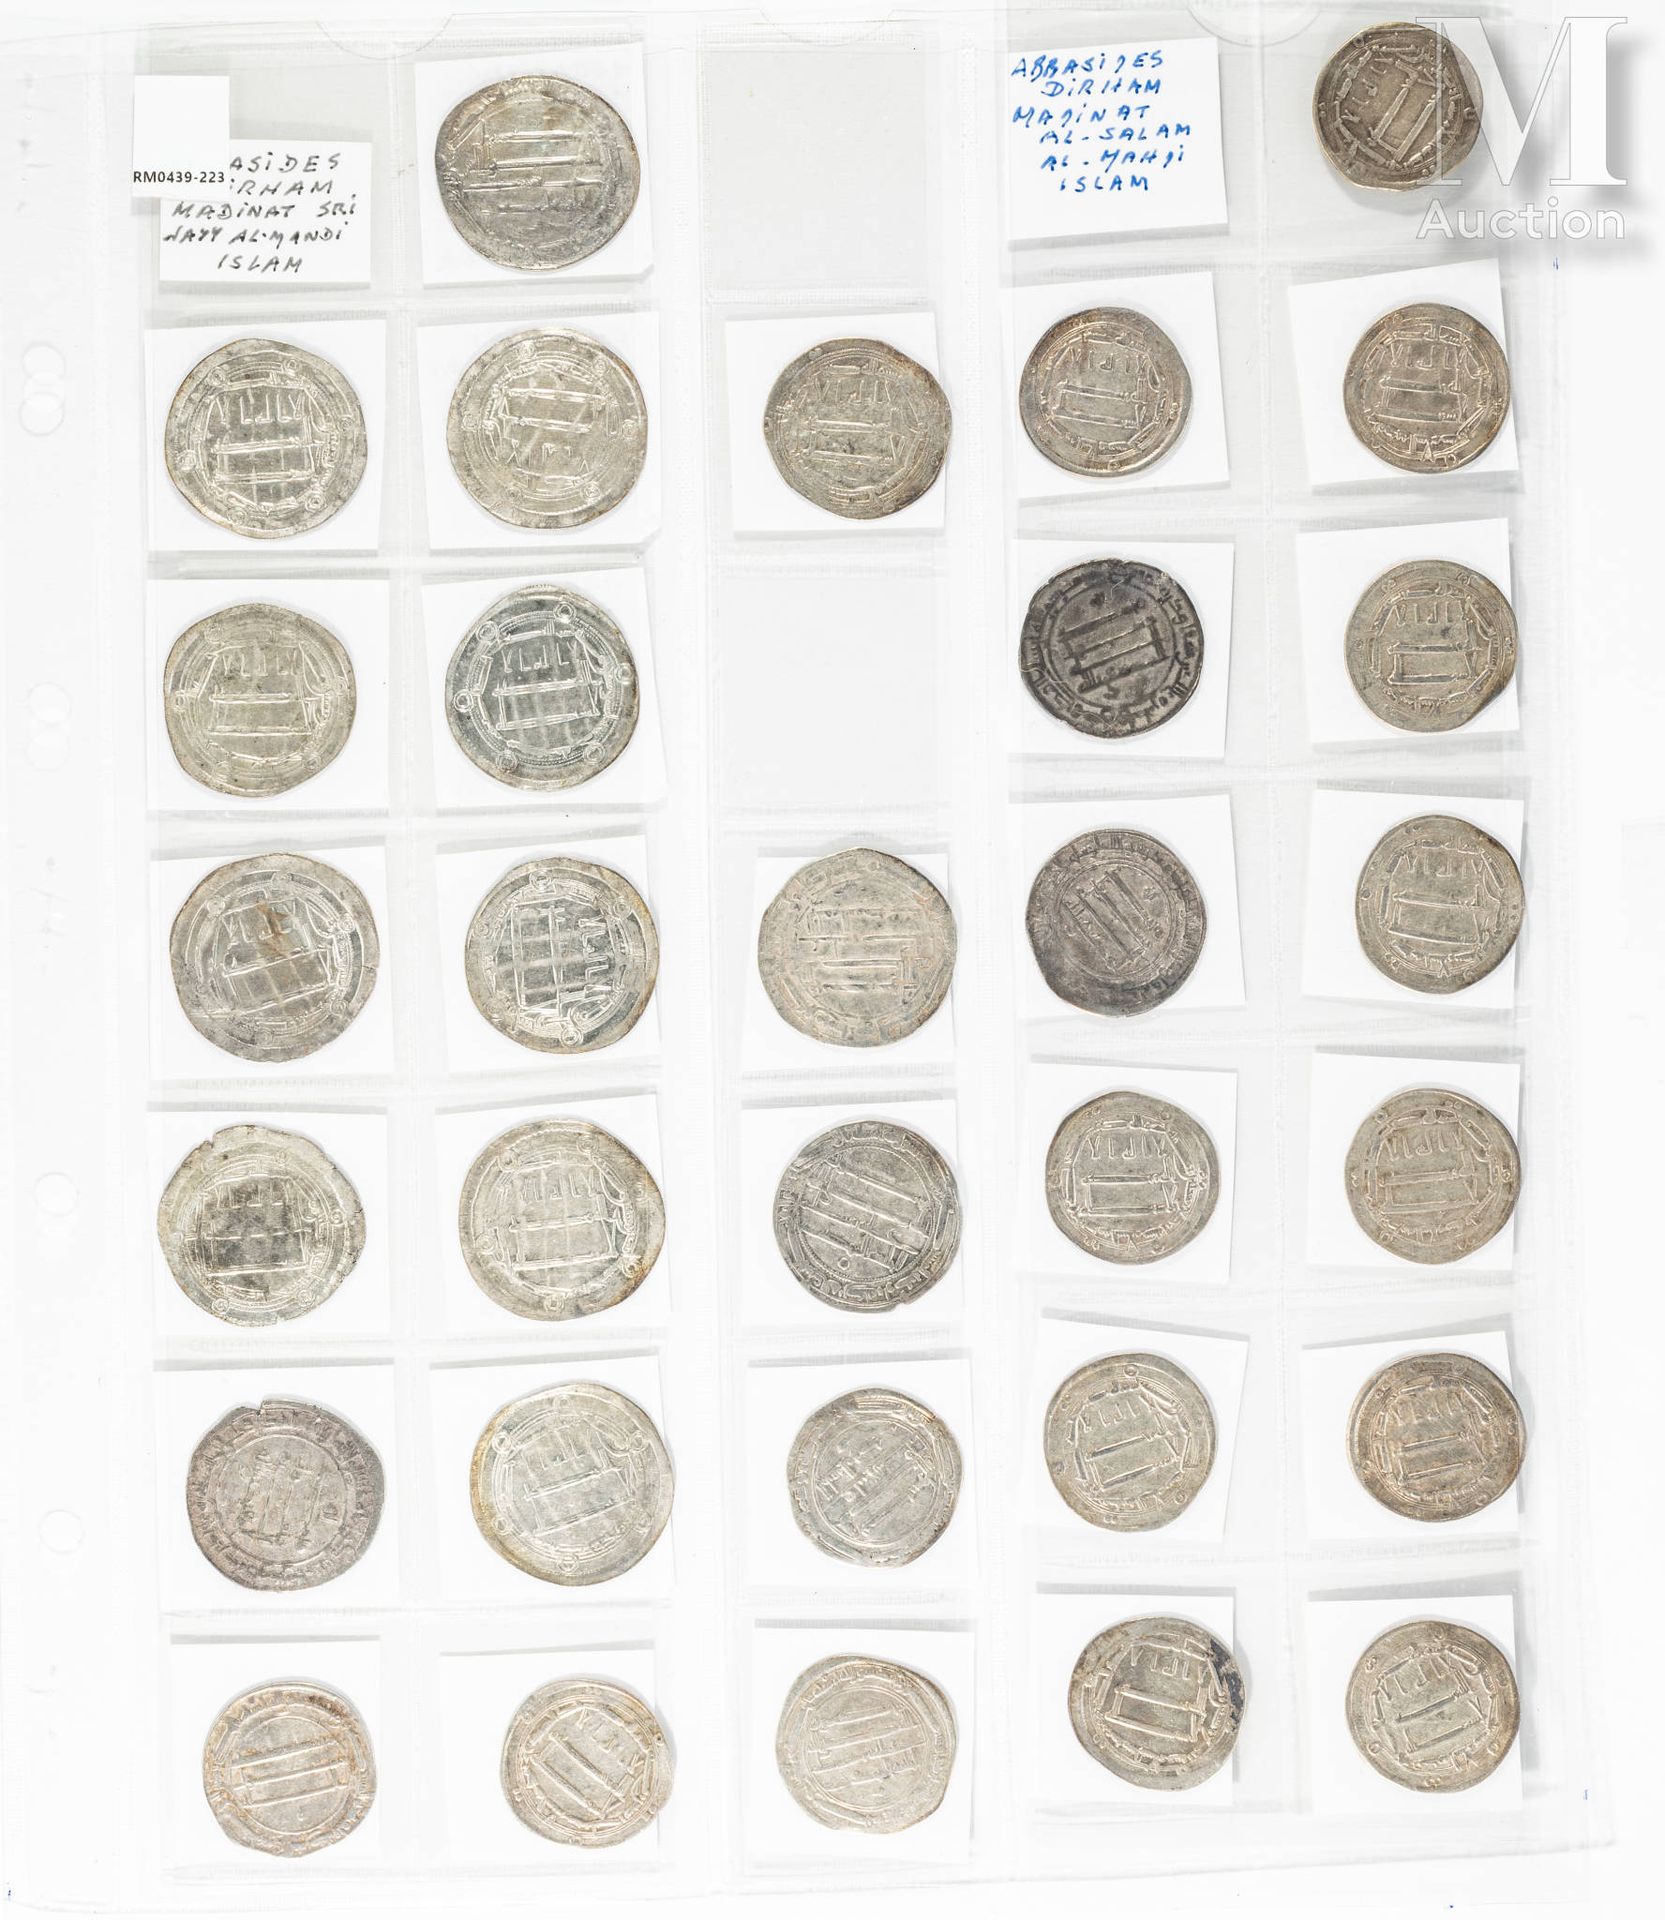 Califat Abbasside - Important lot of silver dirhams from various caliphs, includ&hellip;